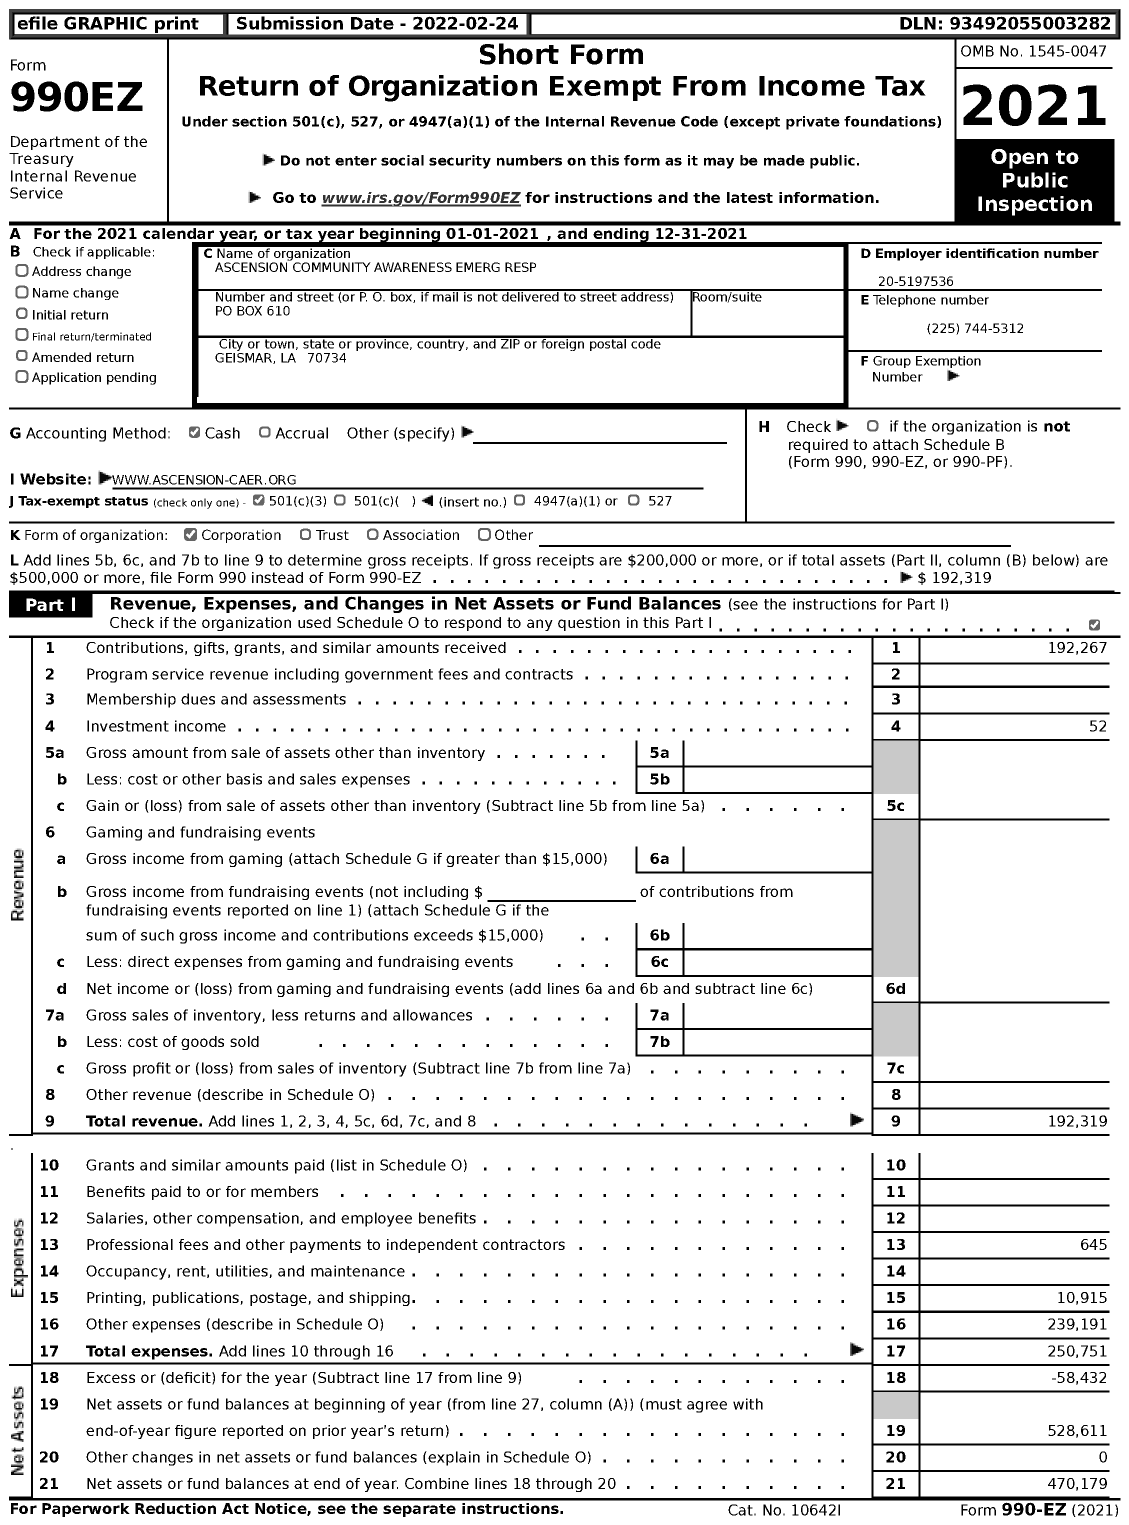 Image of first page of 2021 Form 990EZ for Ascension Community Awareness Emerg Response